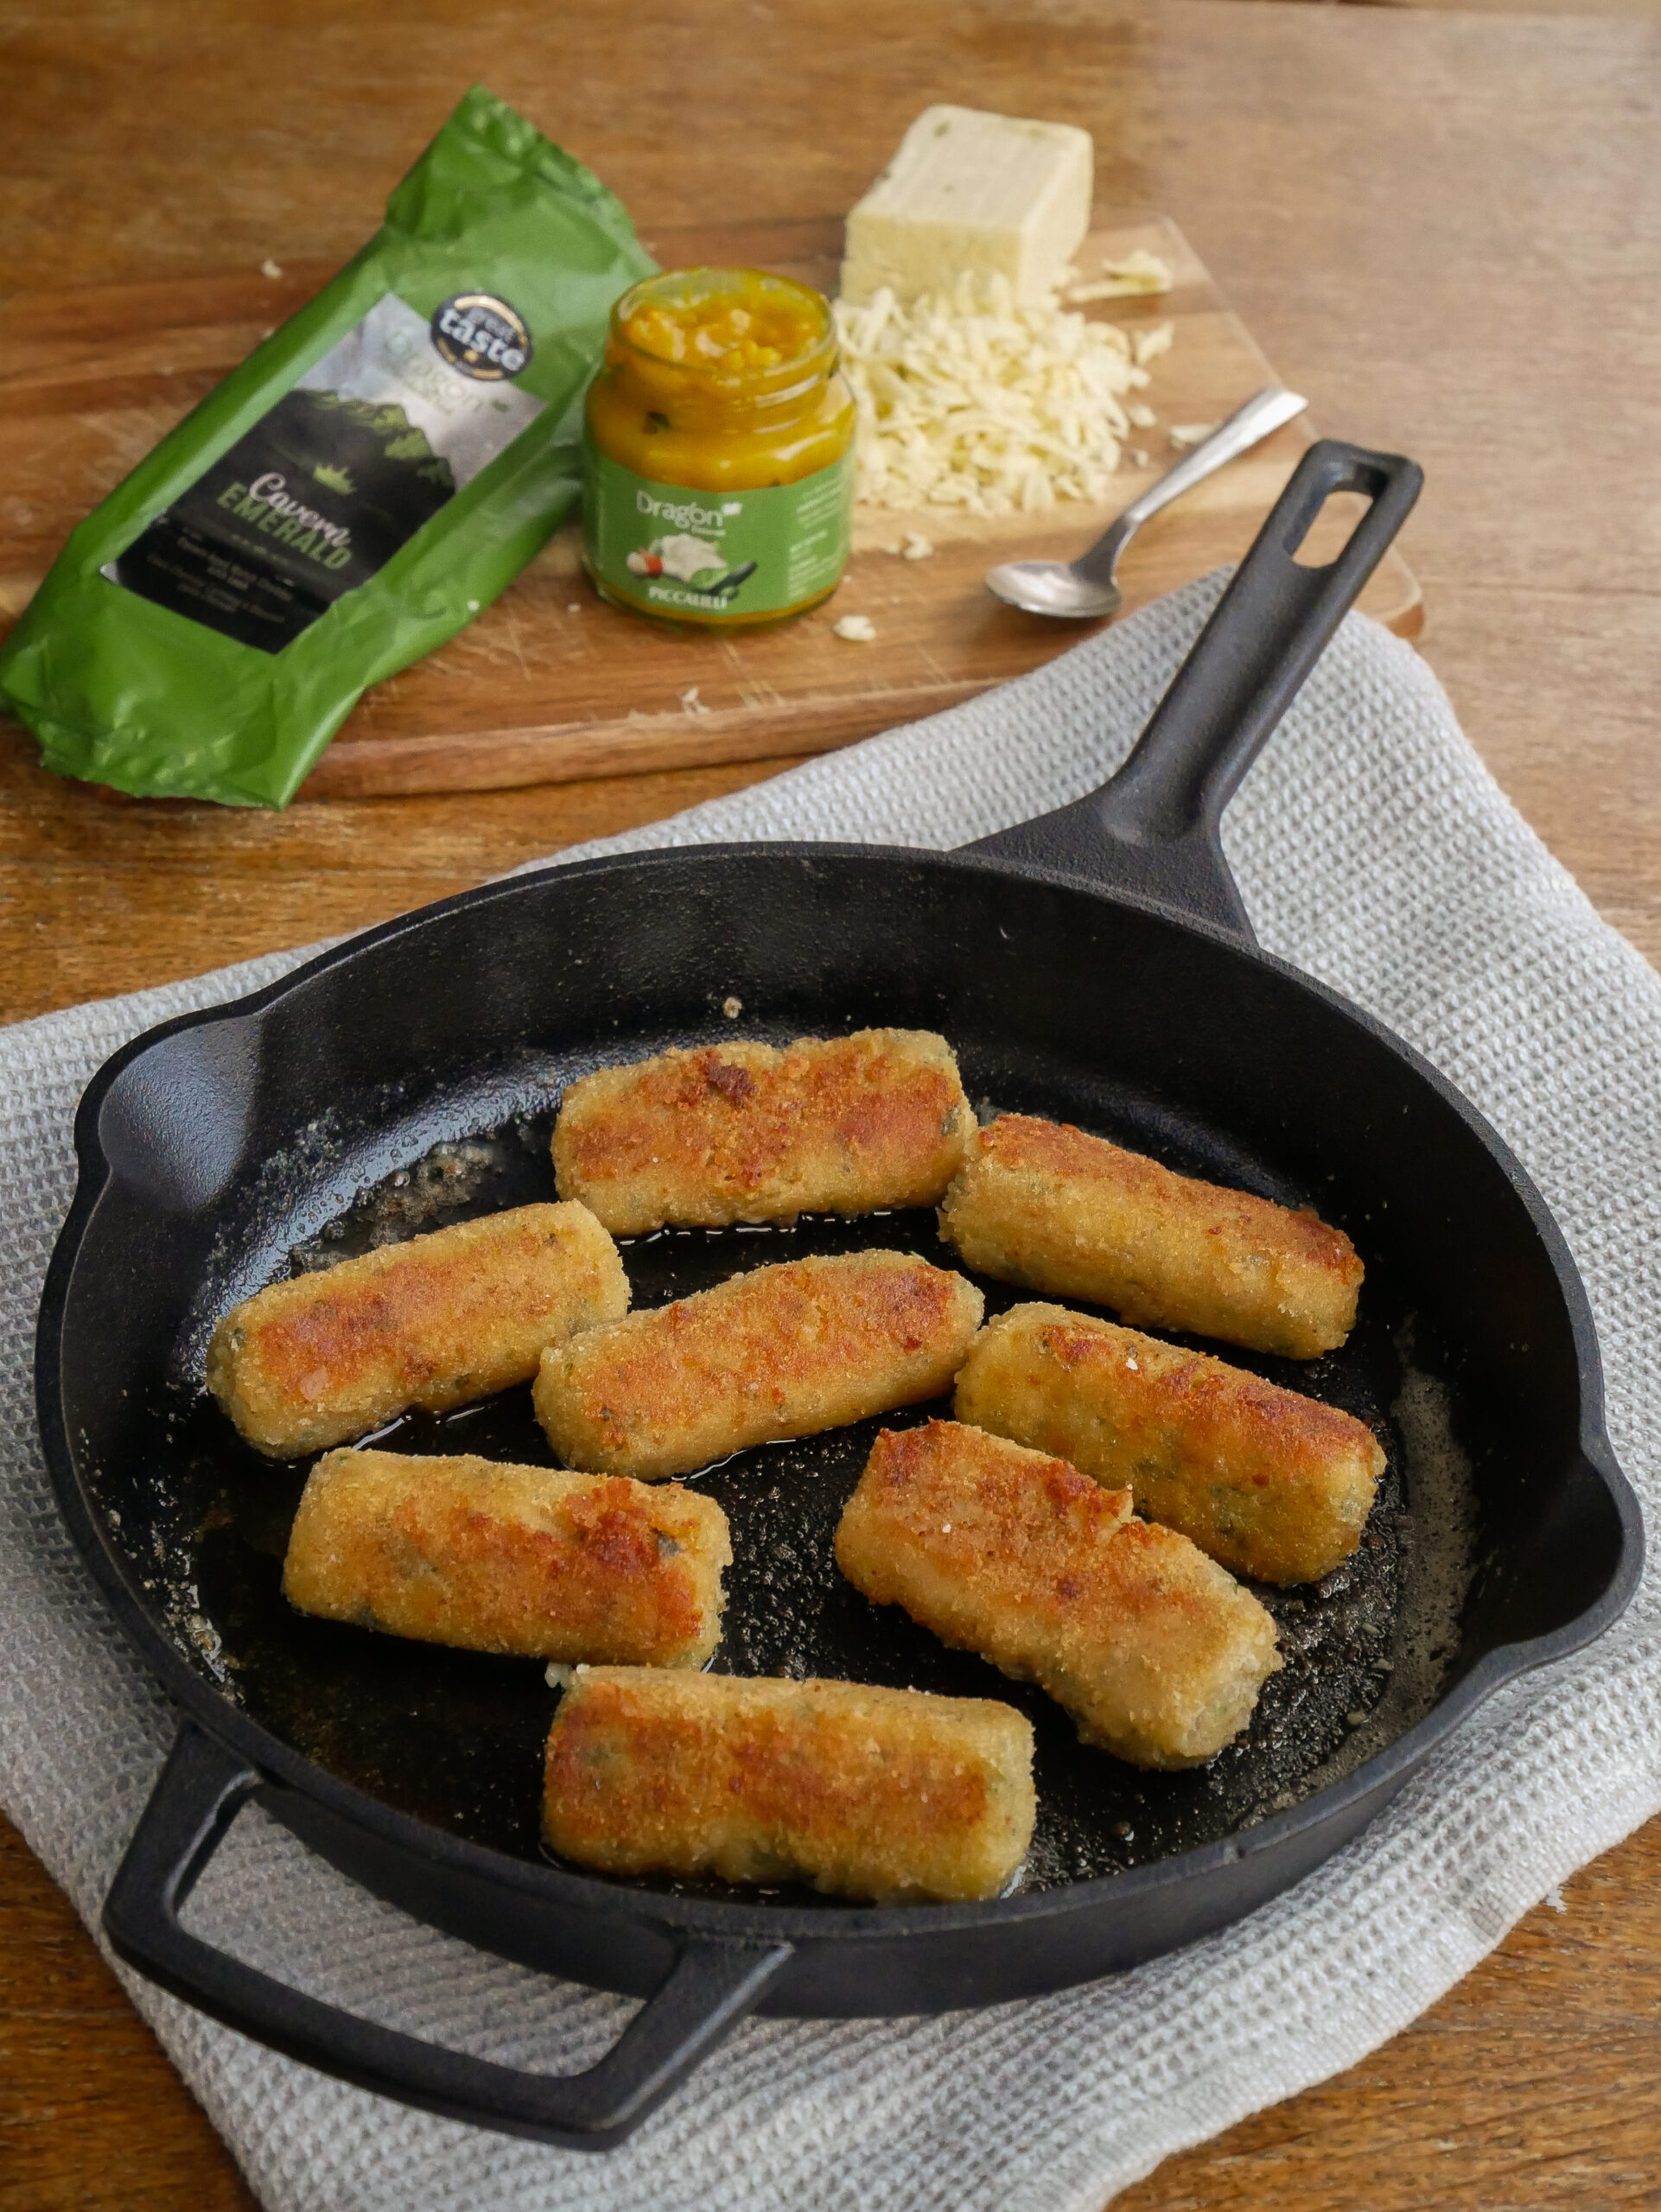 Cavern Emerald Welsh Glamorgan Sausages by @TheRareWelshBit